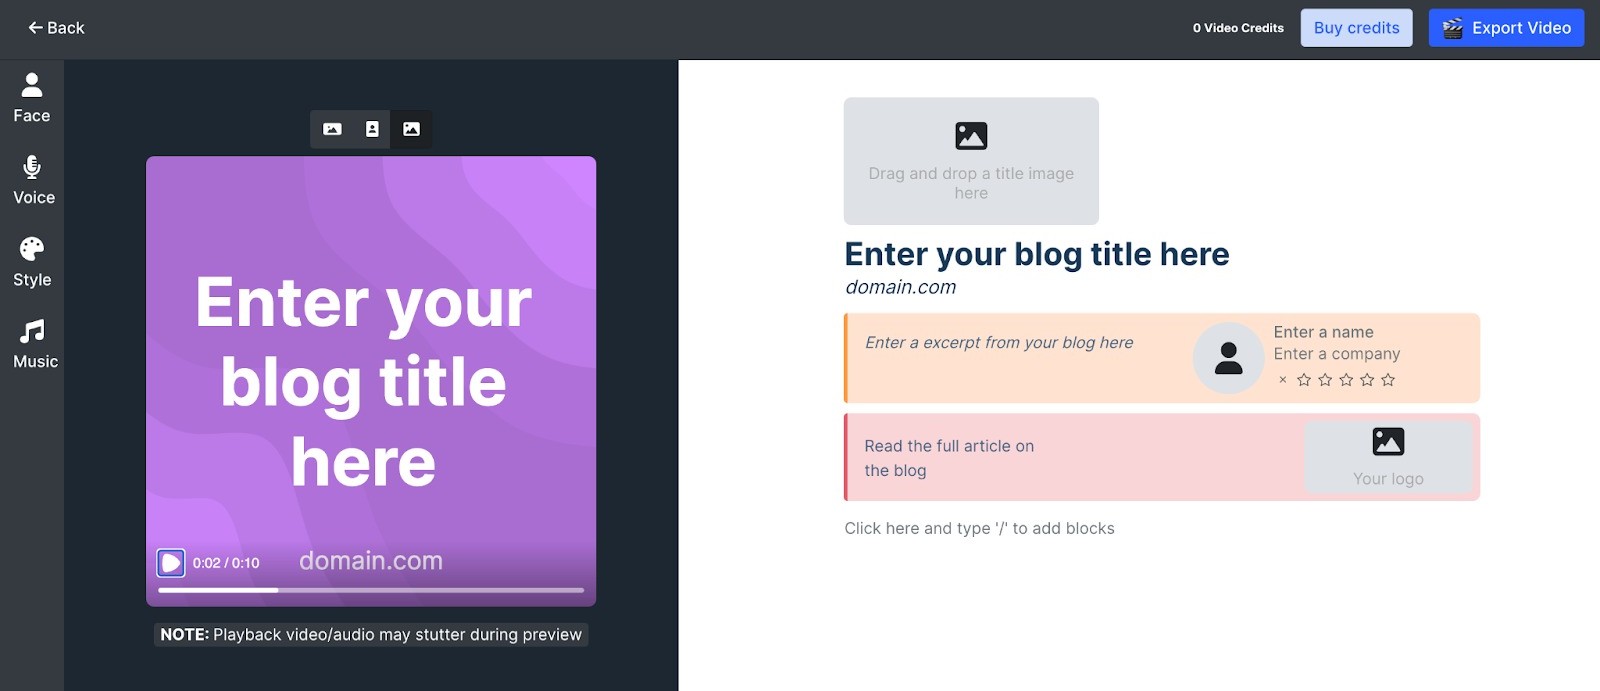 Prompts user to "Enter an excerpt from your blog here"